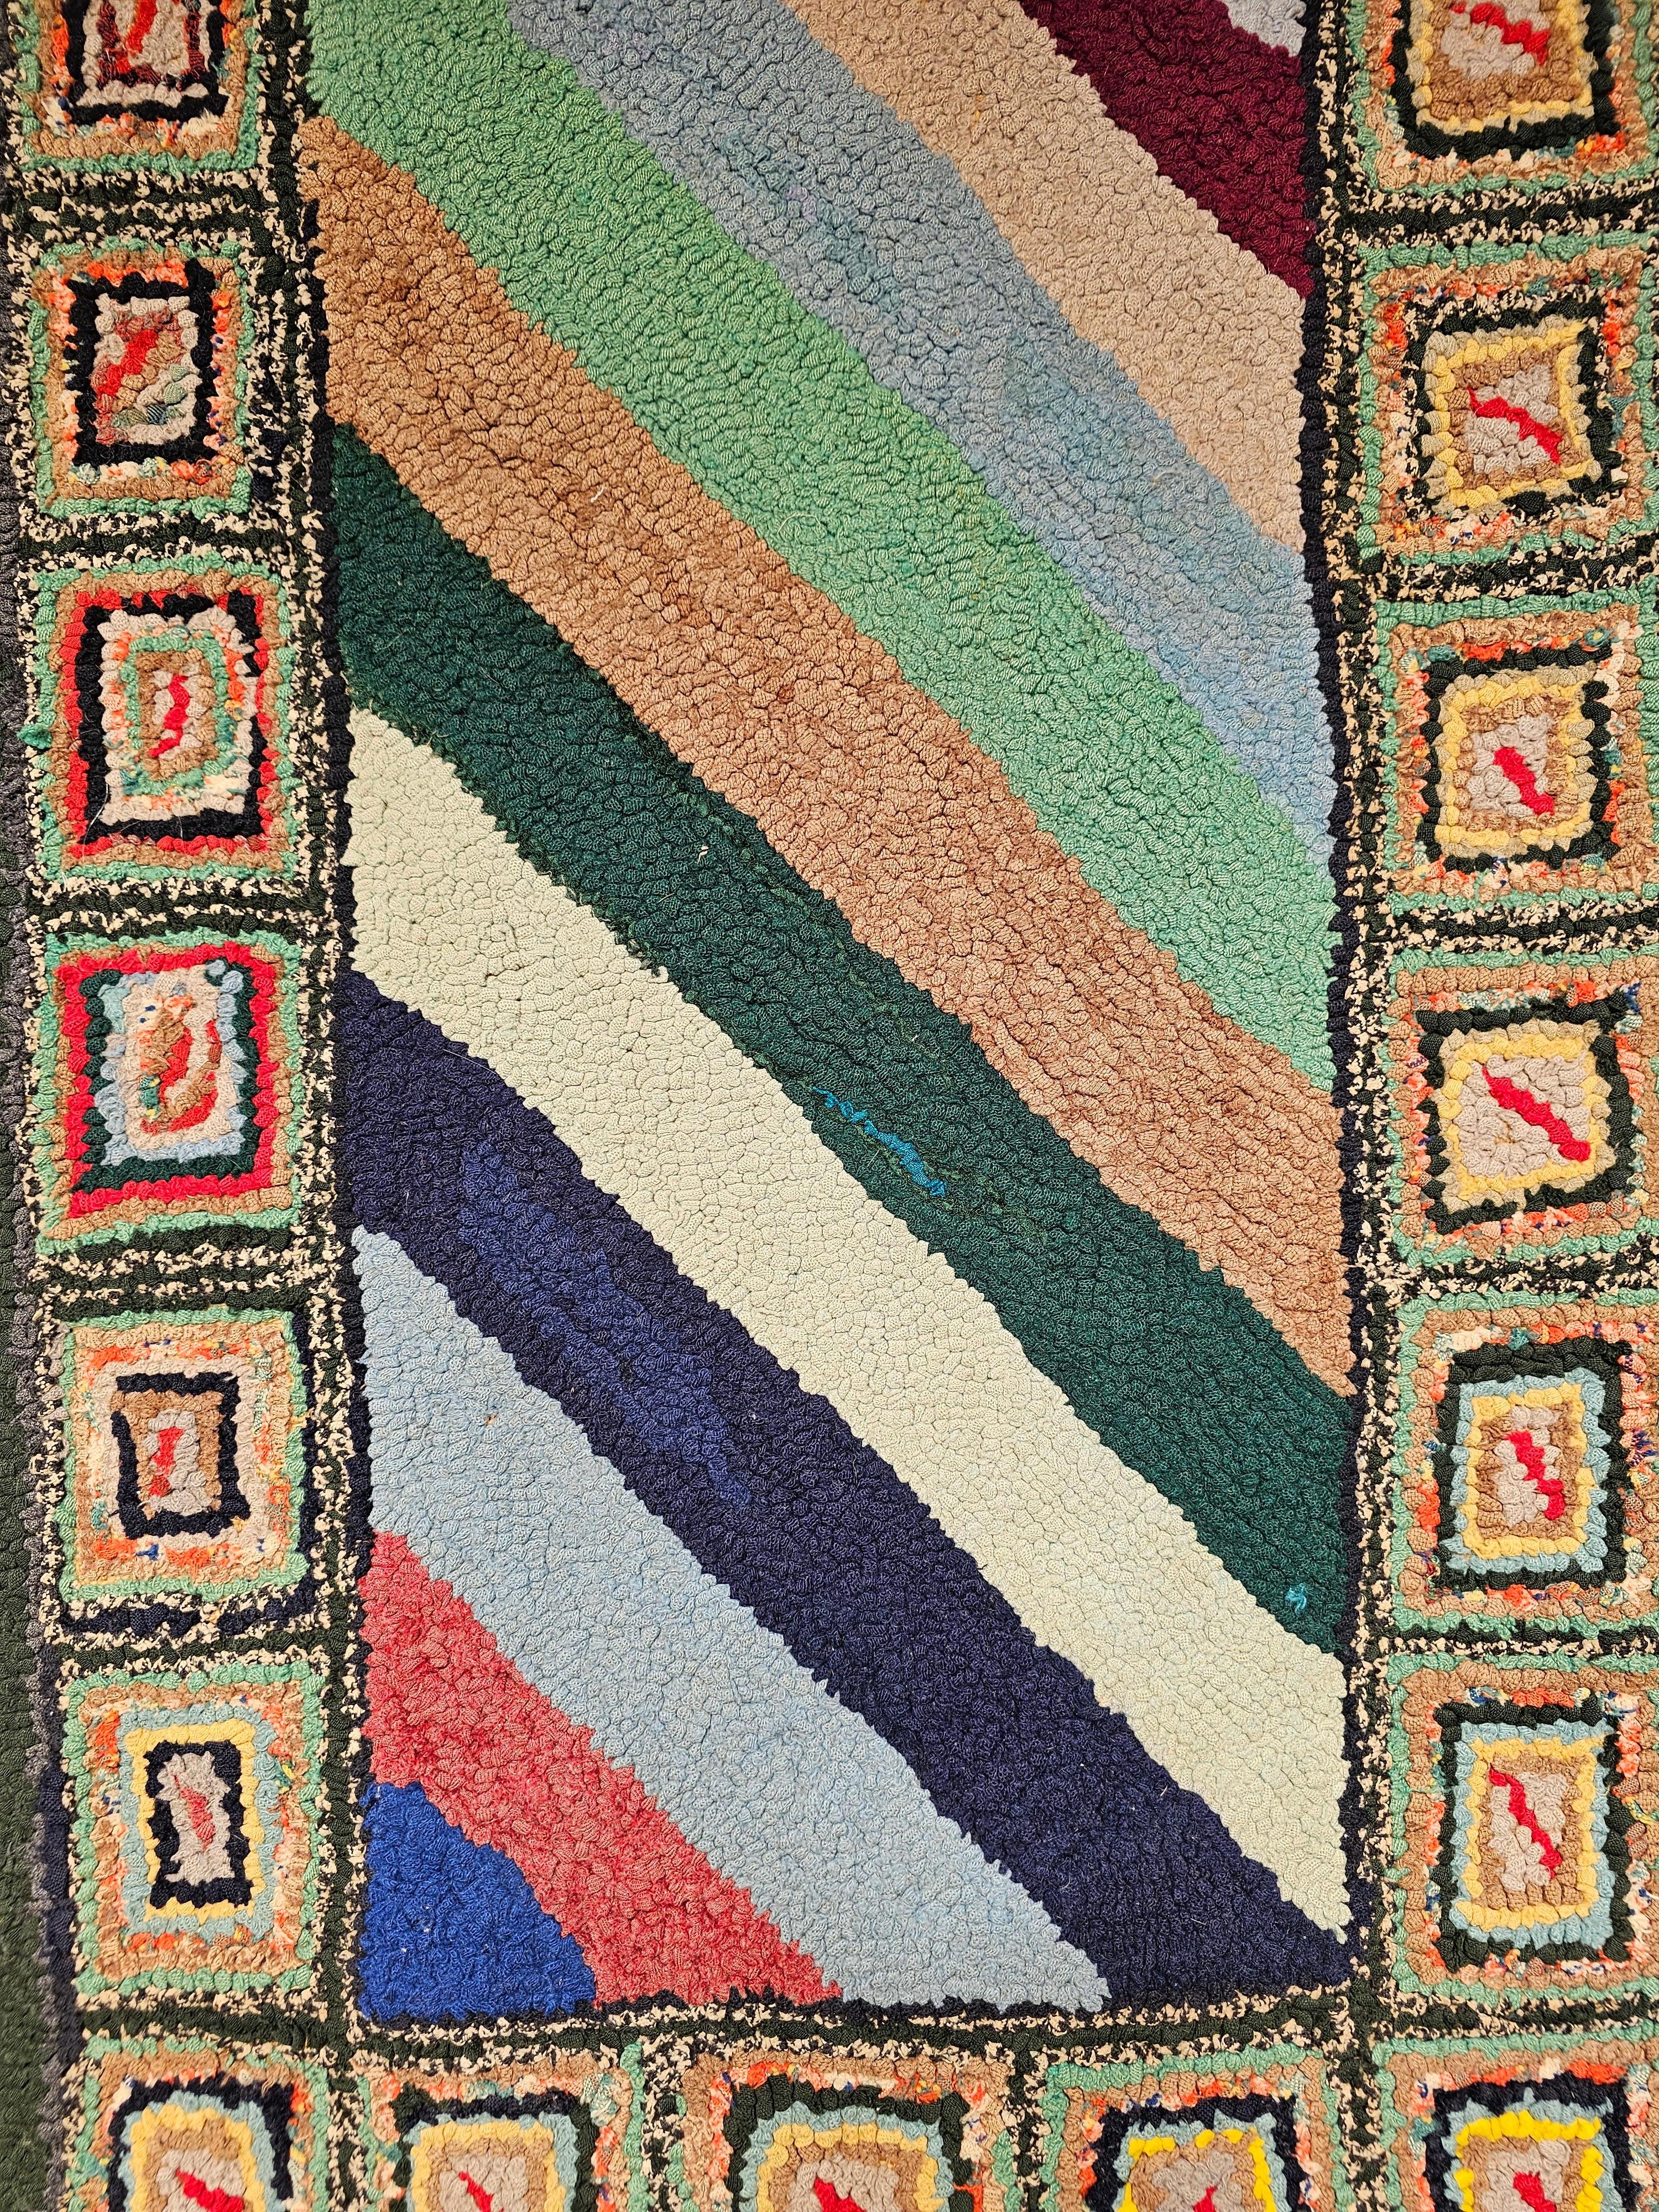 Hand-Crafted Vintage American Hand Hooked Rug with a Stripe Pattern as Tapestry Wall Art For Sale